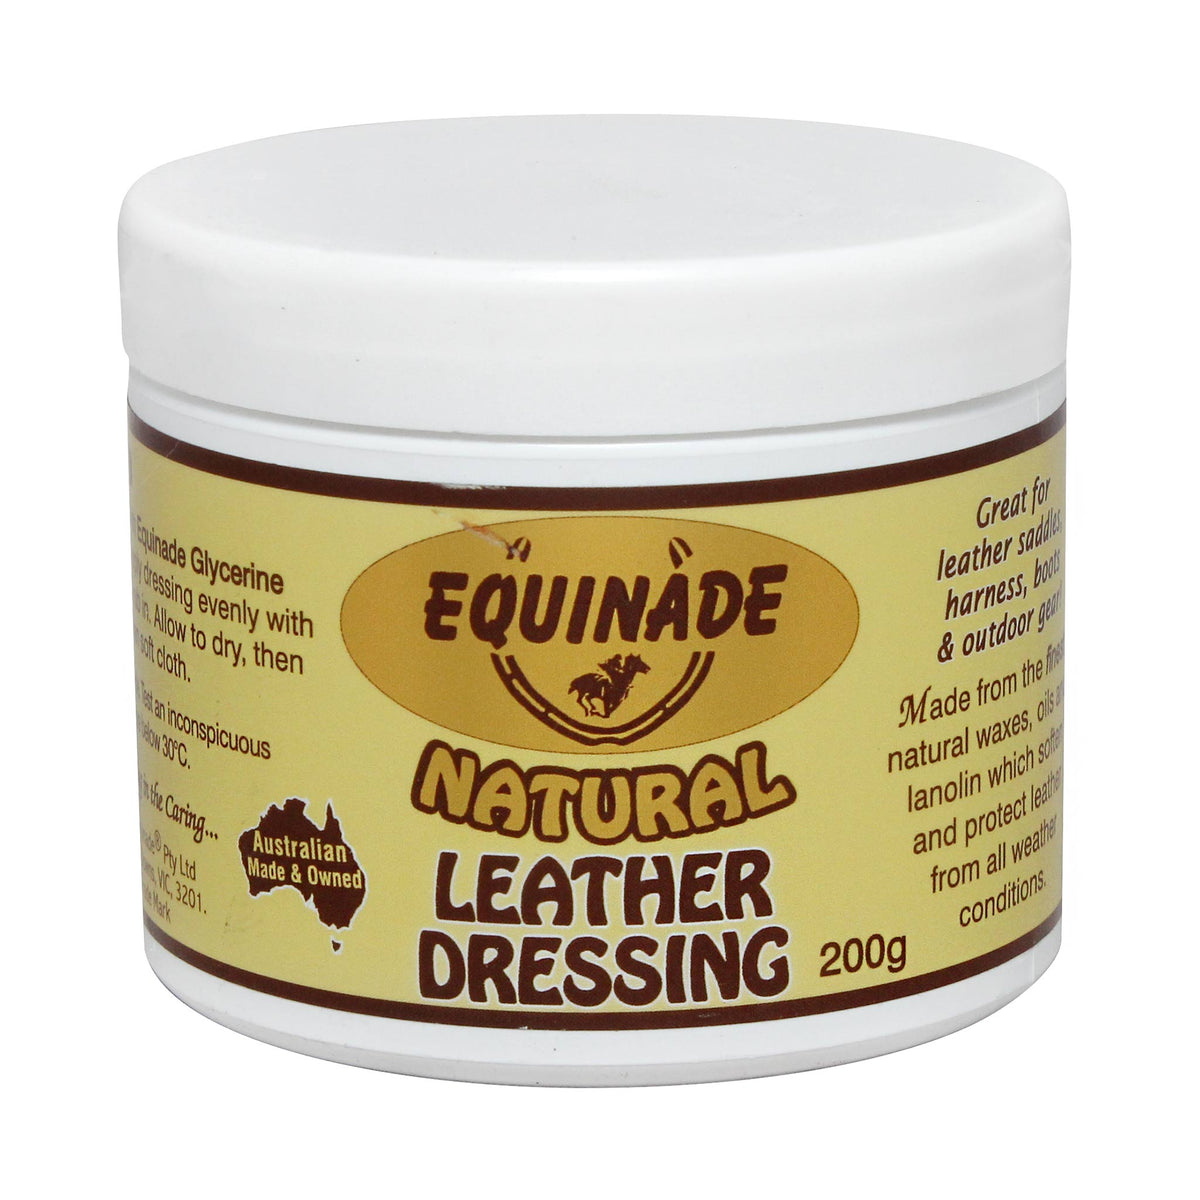 Equinade Natural Leather Dressing